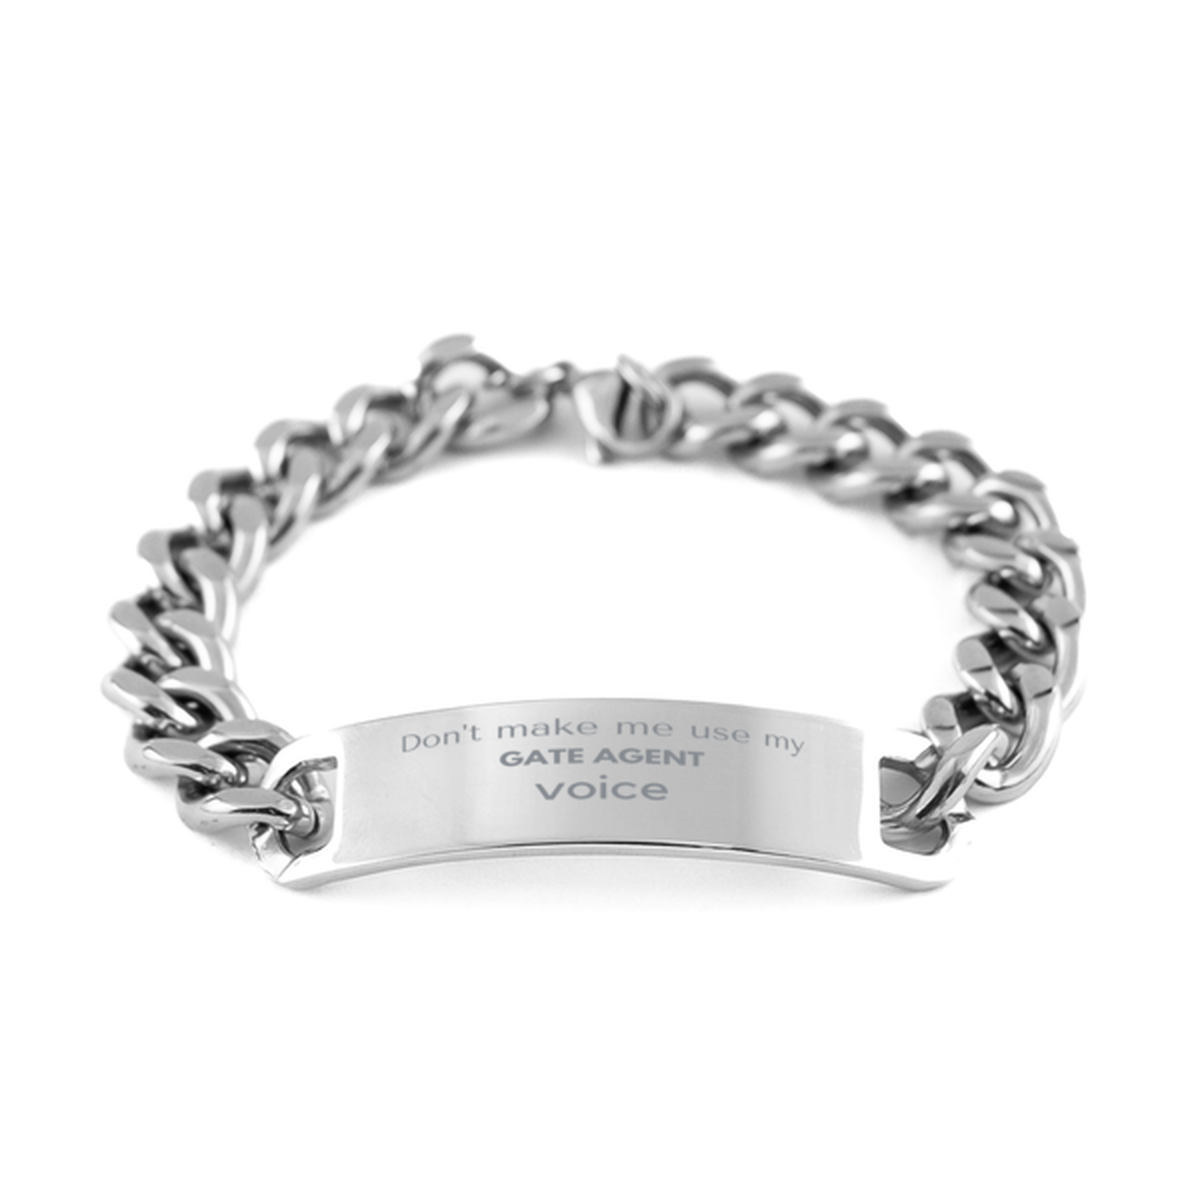 Don't make me use my Gate Agent voice, Sarcasm Gate Agent Gifts, Christmas Gate Agent Cuban Chain Stainless Steel Bracelet Birthday Unique Gifts For Gate Agent Coworkers, Men, Women, Colleague, Friends